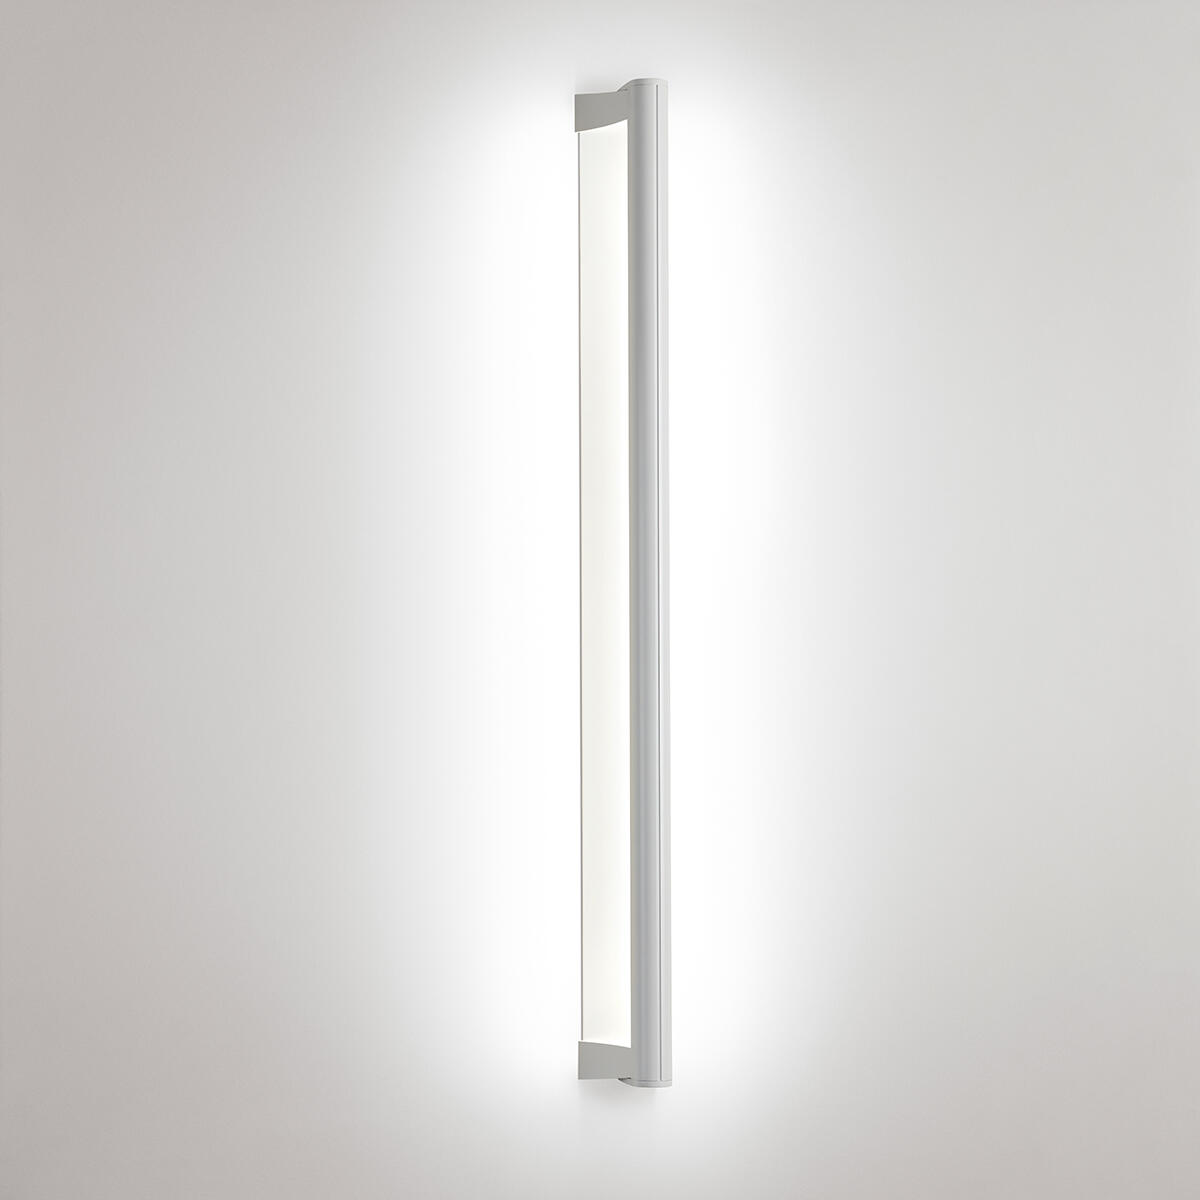 A surface mounted linear luminaire with a body that curves into the base with hidden indirect lighting